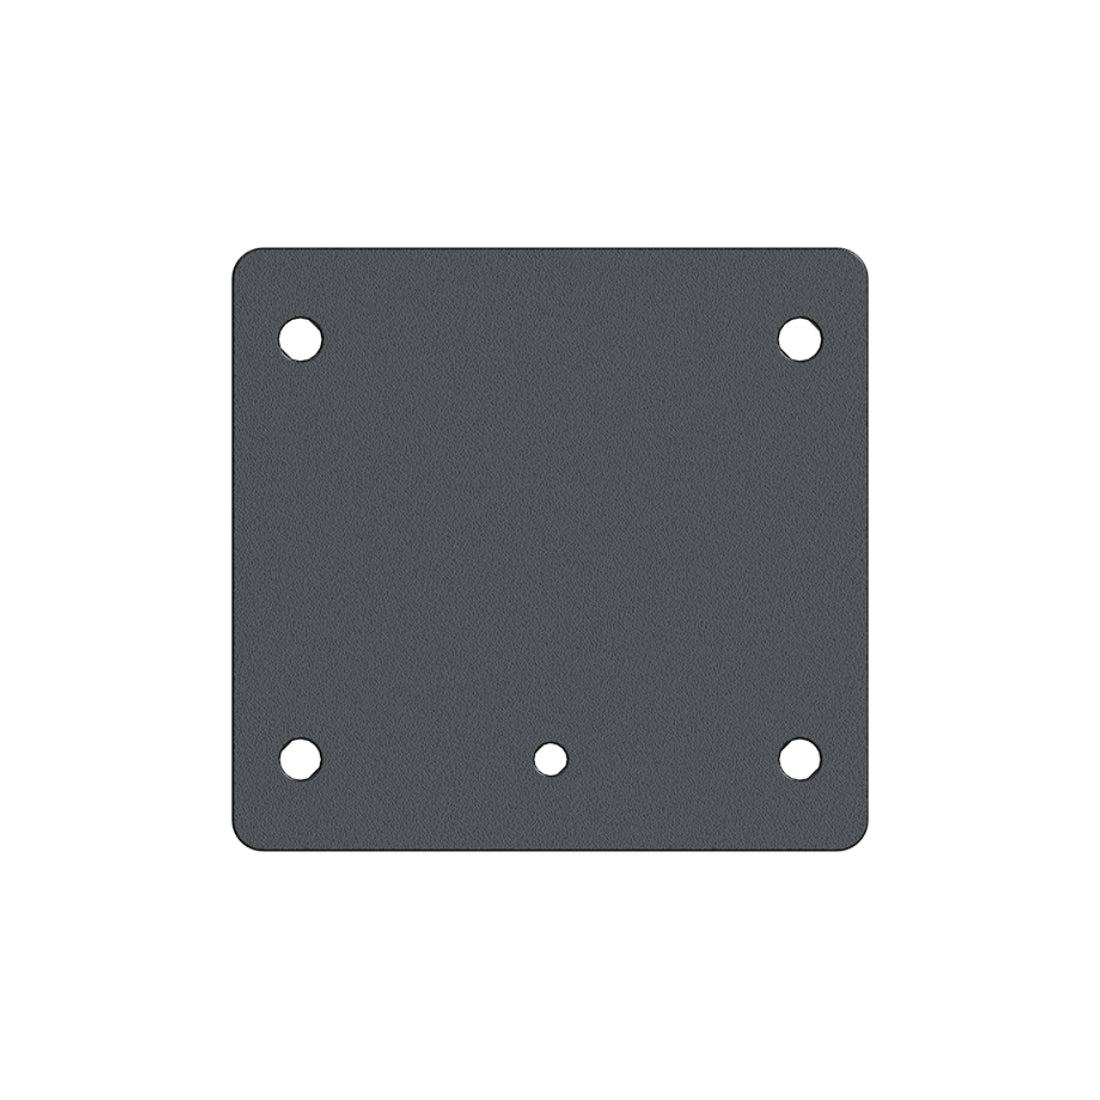 Moza Adapter Mounting Plate for R21/R16/R9 Bases - محاكي - Store 974 | ستور ٩٧٤